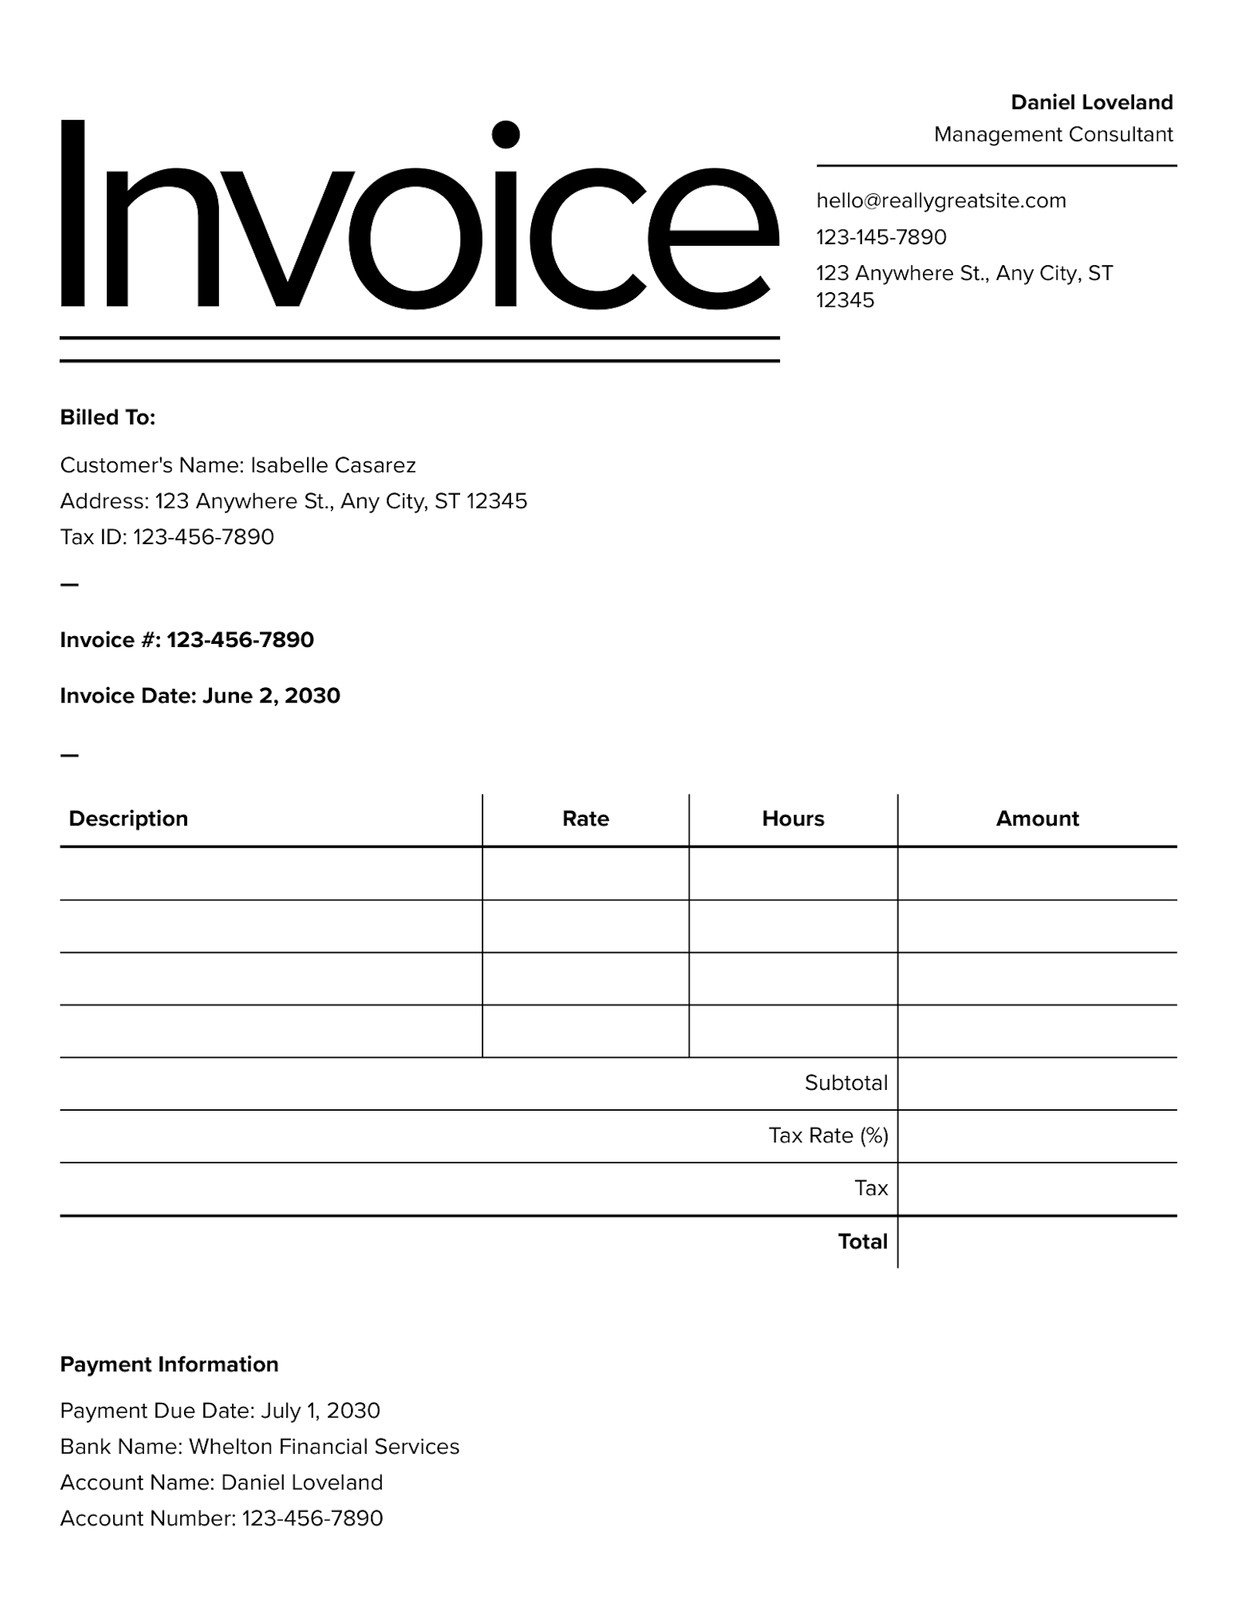 Free, Printable, Professional Invoice Templates To Customize | Canva intended for Free Printable Invoices